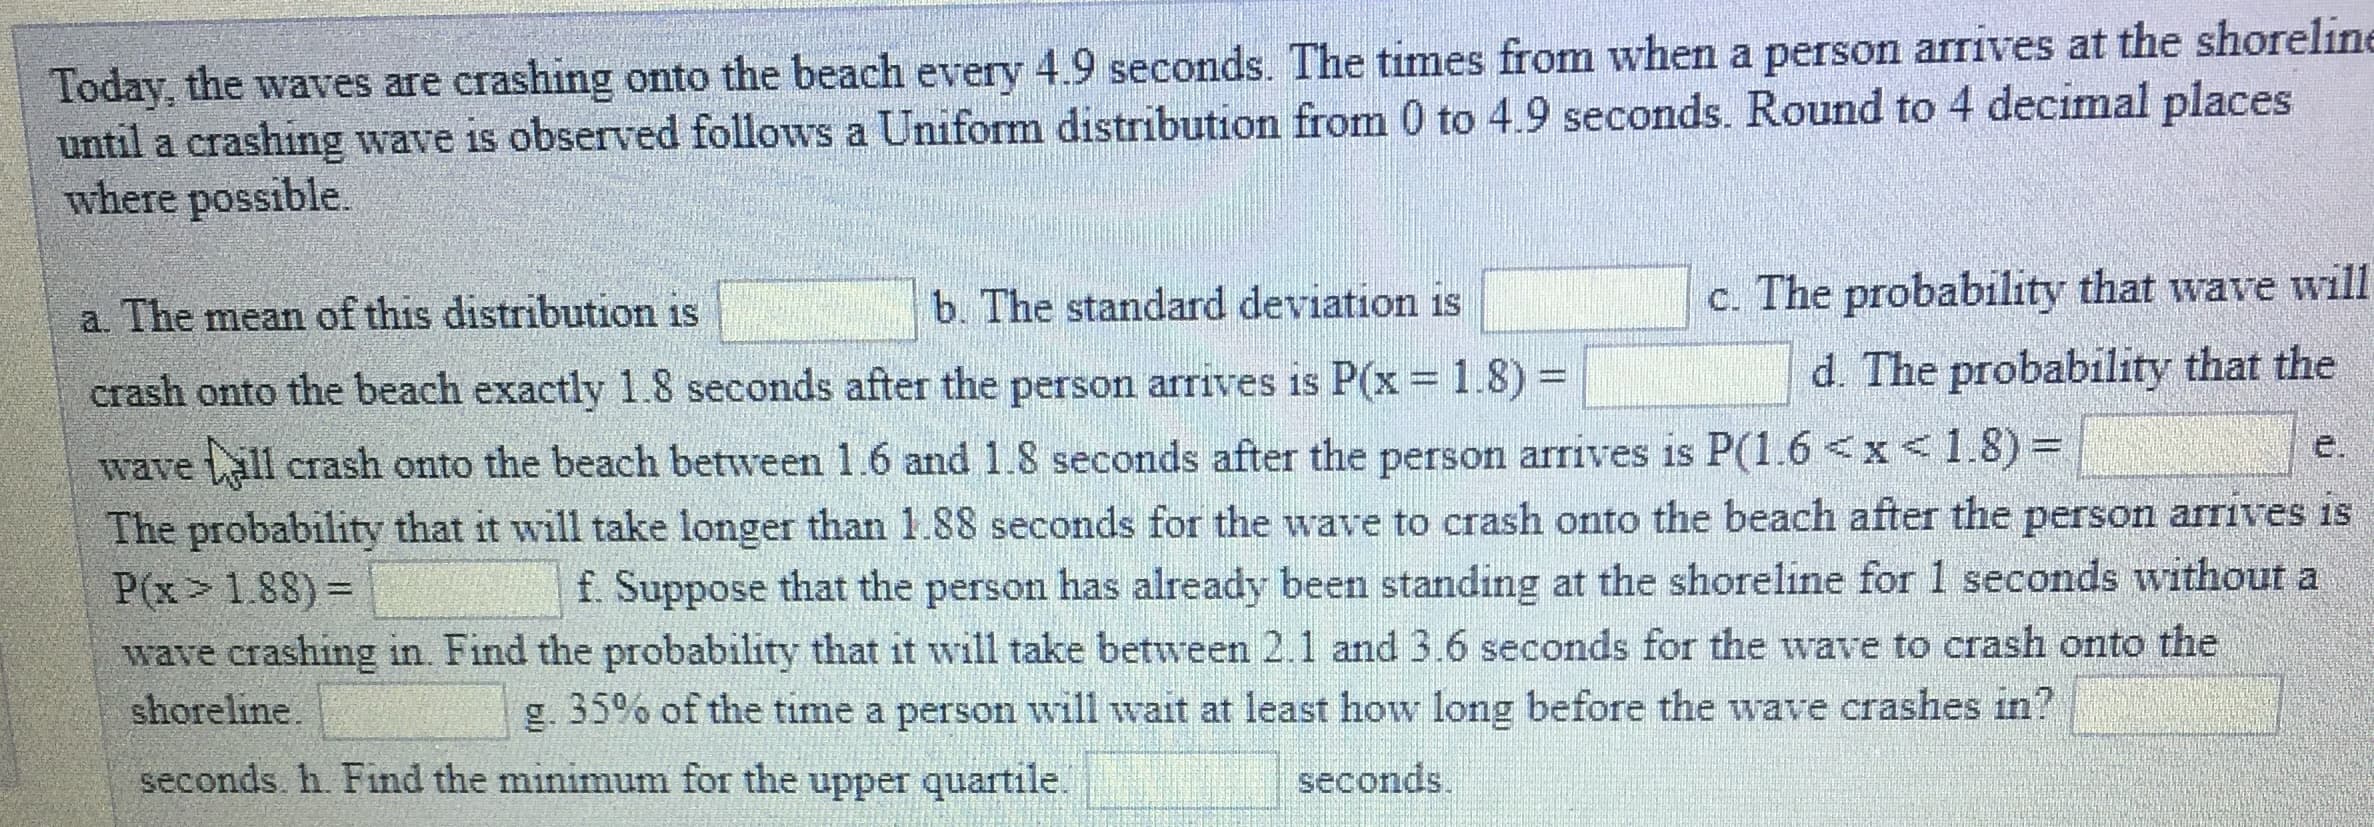 Today, the waves are crashing onto the beach every 4.9 seconds. The times from when a person
until a crashing wave is observed follows a Uniform distribution from 0 to 4.9 seconds. Round to 4 decimal places
where possible.
c. The probability that wave will
a. The mean of this distribution isb. The standard deviation is
crash onto the beach exactly 1.8 seconds after the person arrives is P(x-1.8)
wave ill crash onto the beach between 1 6 and 1.8 seconds after the person arrives is P(1.6 x1.8)
The probability that it will take longer than 1.88 seconds for the wave to crash onto the beach after the person arrives is
P(x 188)-
wave crashing in. Find the probability that it will take between 2.1 and 3.6 seconds for the wave to crash onto the
d. The probability that the
f. Suppose that the person has already been standing at the shoreline for 1 seconds without a
g, 35% of the time a person will wait at least how long before the wave crashes in?
shoreline
seconds. h. Find the minimum for the upper quartile
seconds
